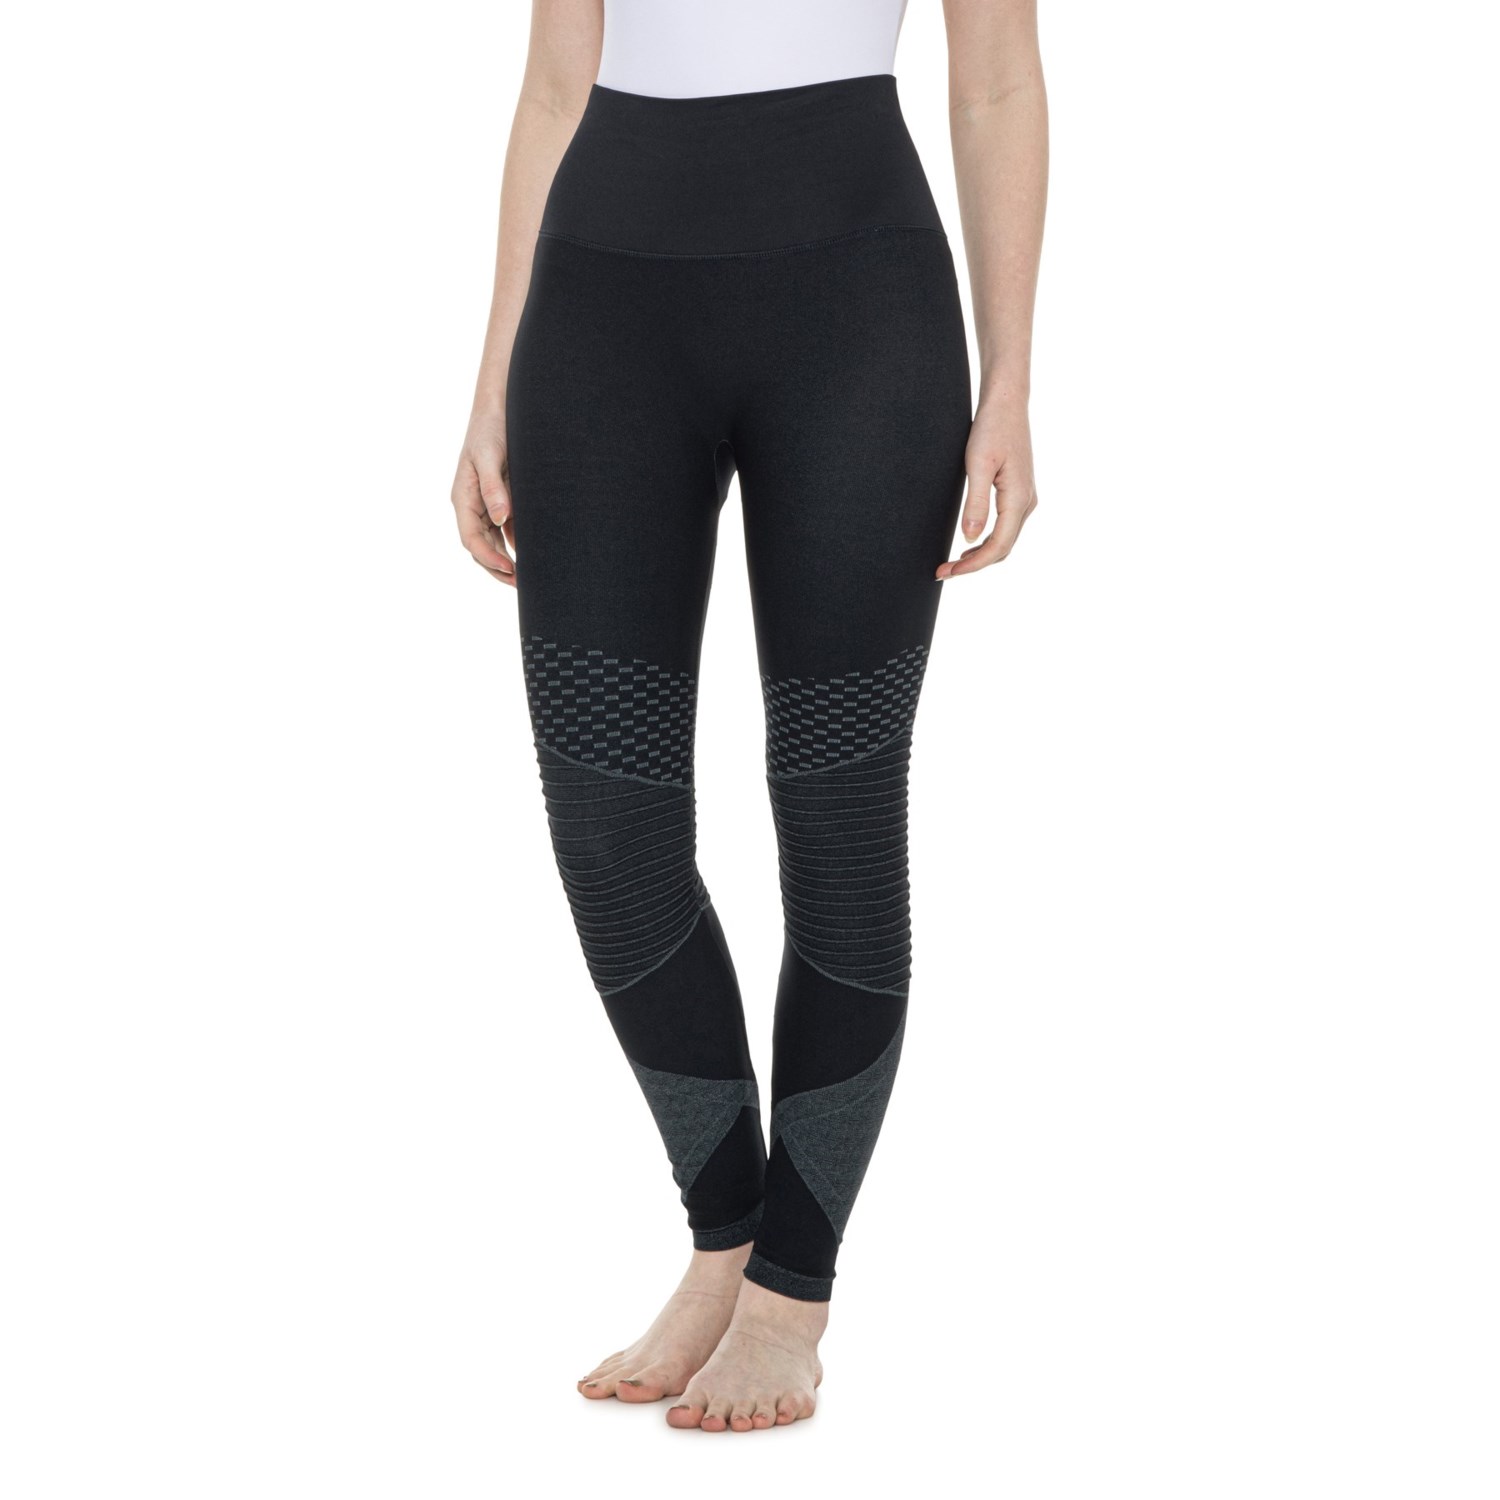 Spanx Is Having a Flash Sale On Moto Leggings — Today Only!